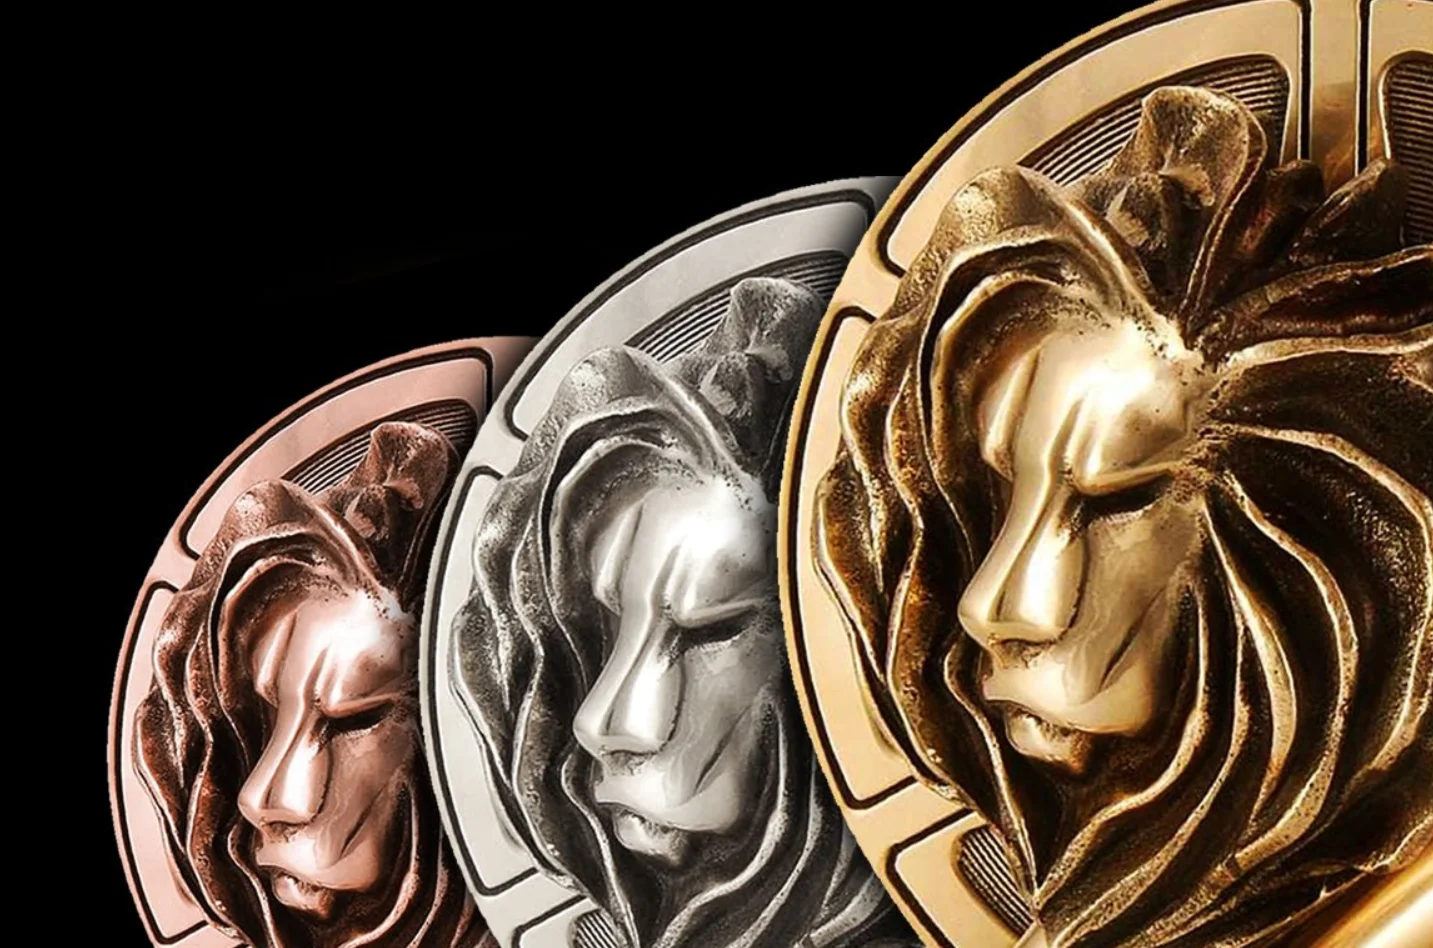 Bronze, silver, and gold lion head medallions on a black background.